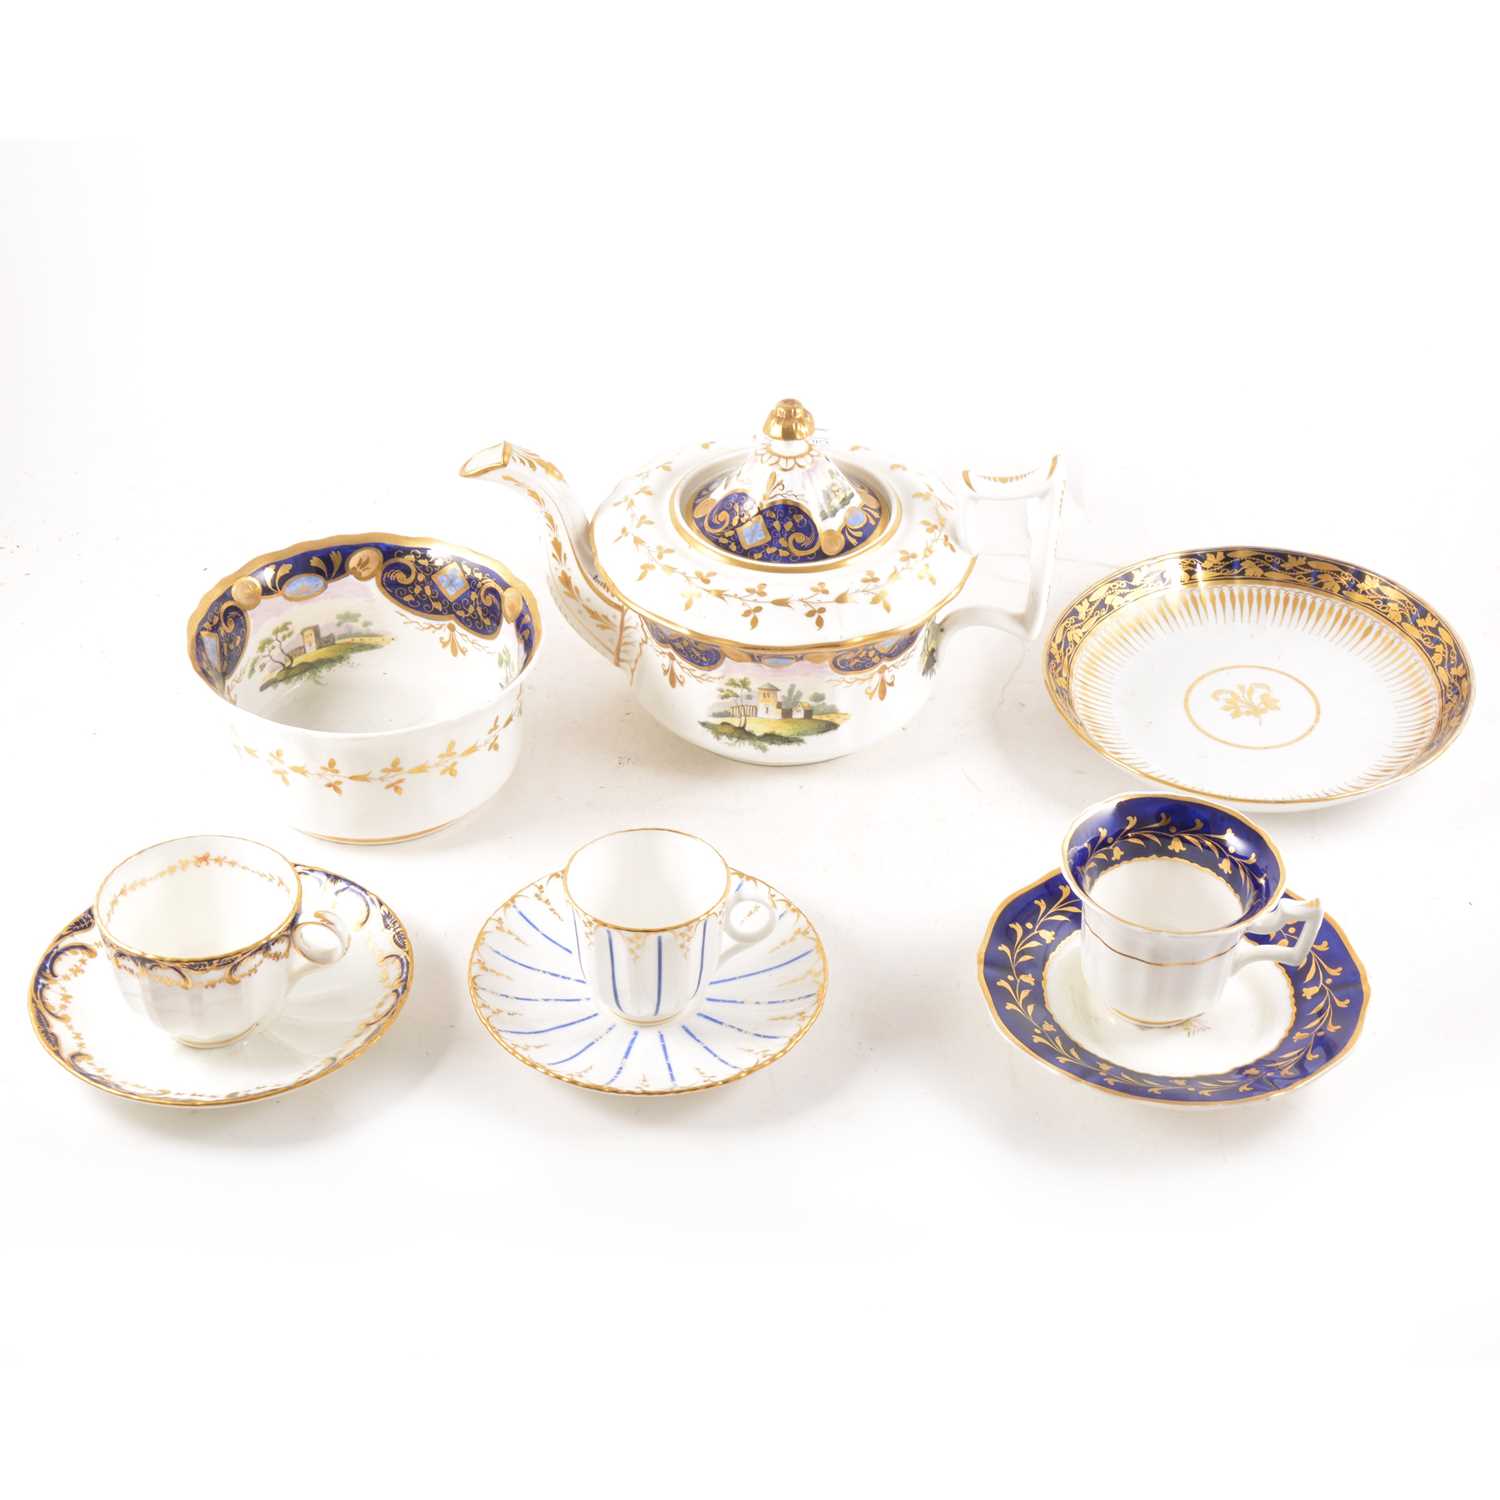 Lot 61 - An English porcelain teapot, and other teaware